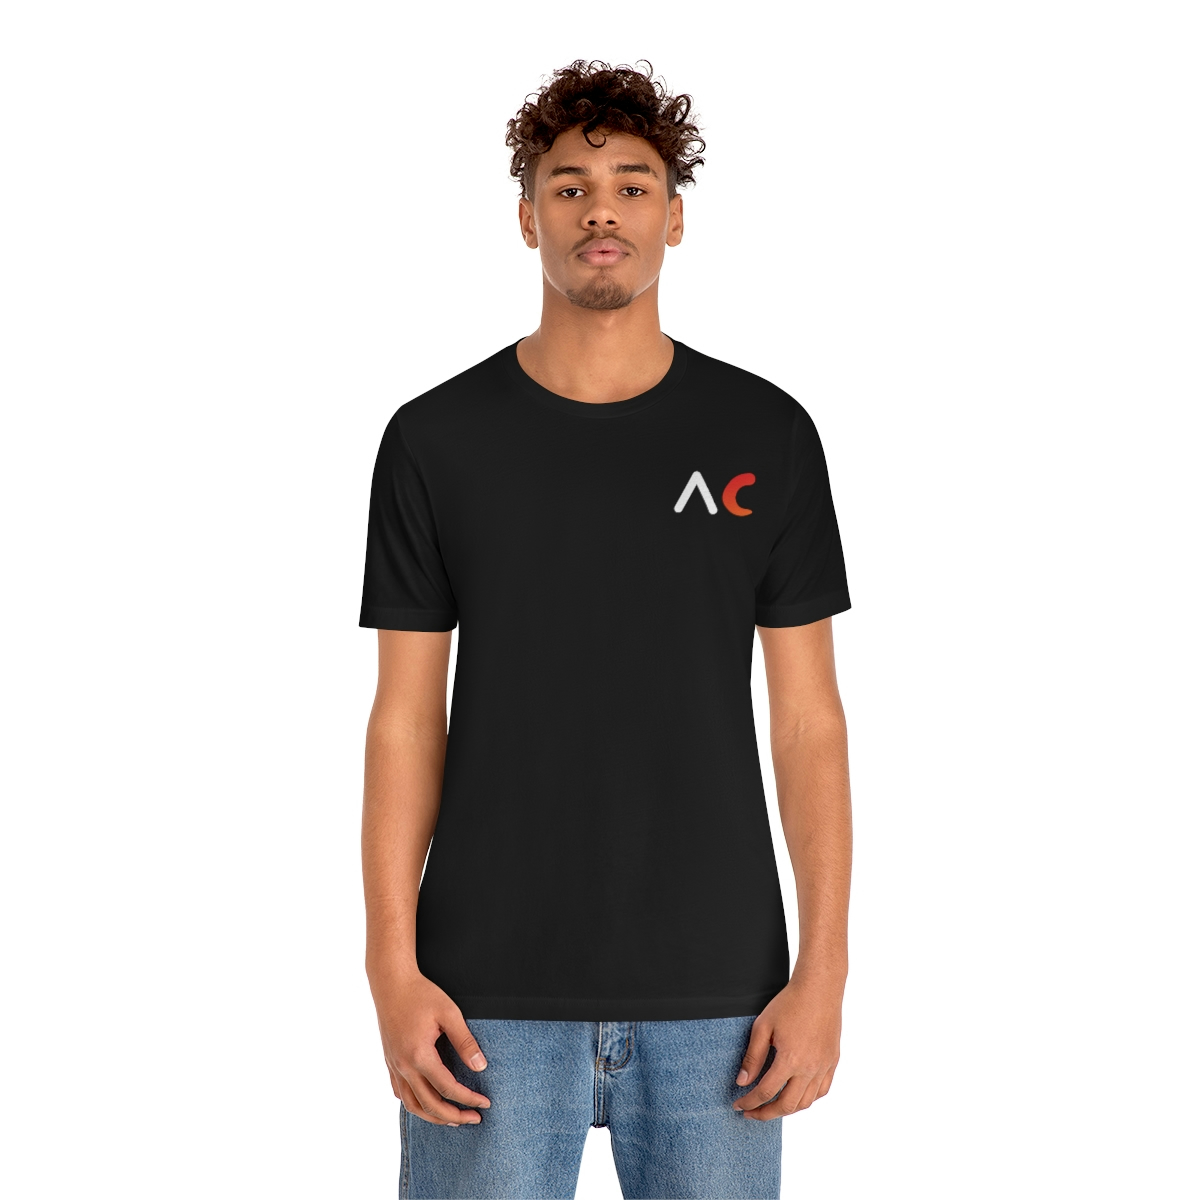 A young medium skin tone male model wearing a black t-shirt with stylized "AC" over the left breast denoting sickle cell trait status.